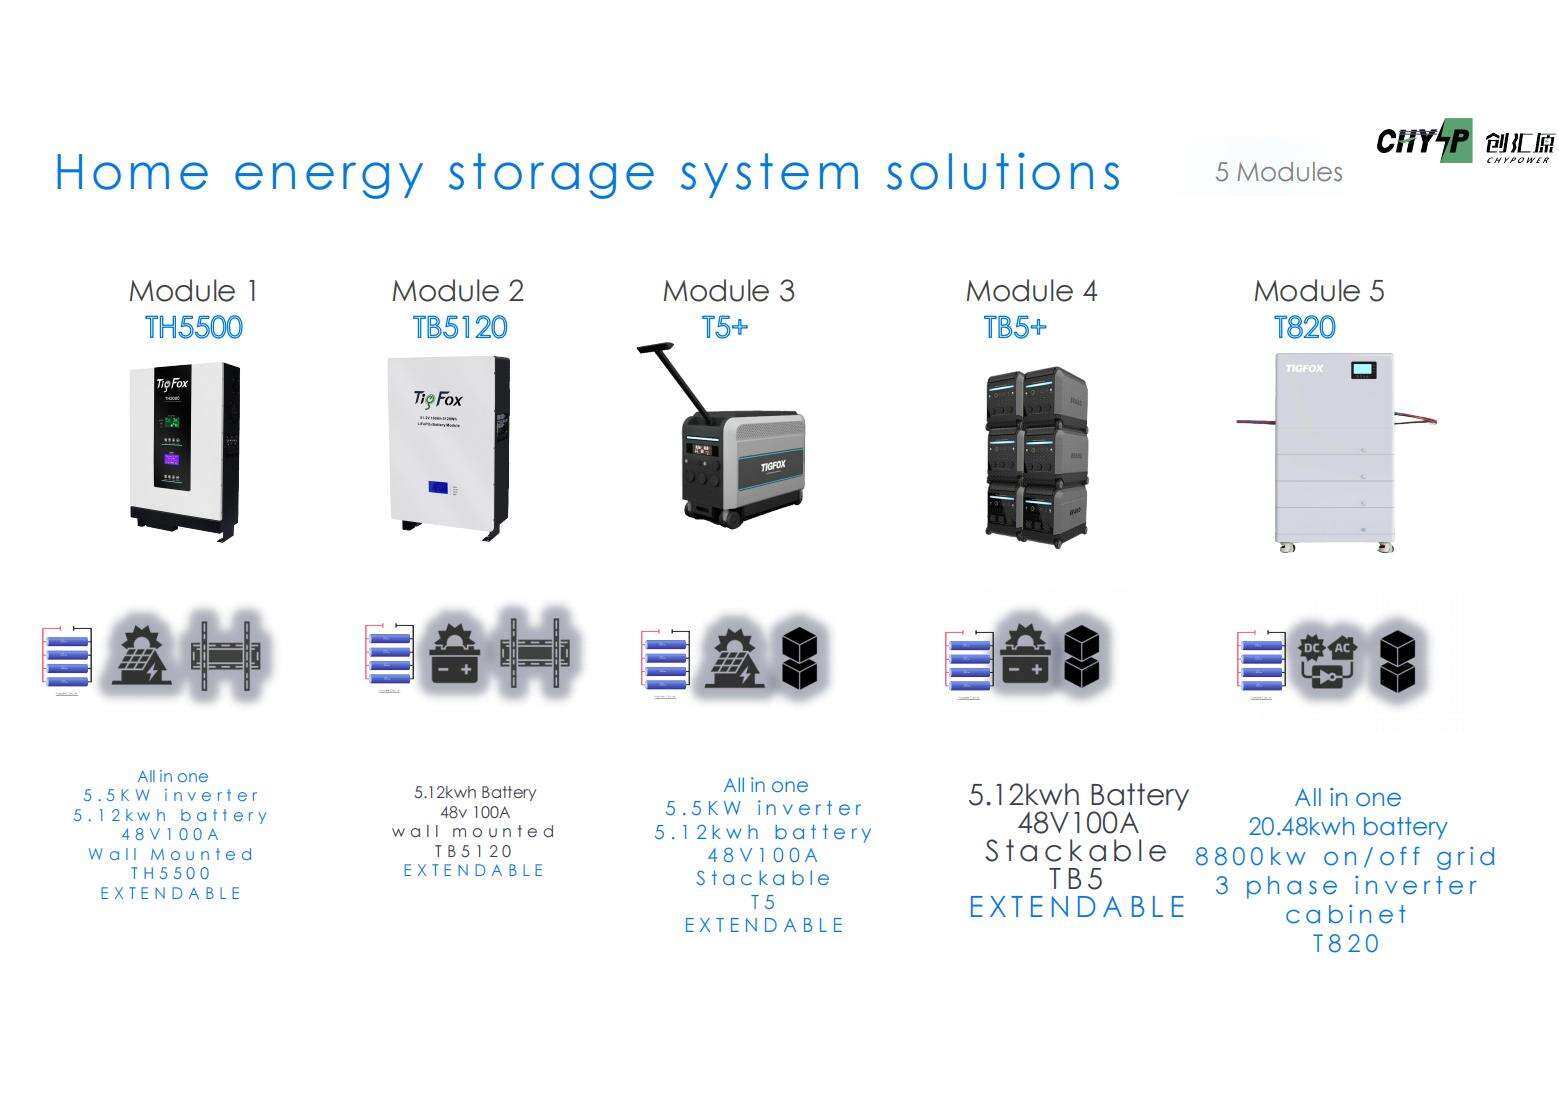 TIGFOX On-Grid and Off-Grid Solar Energy Storage System 20kWh T820